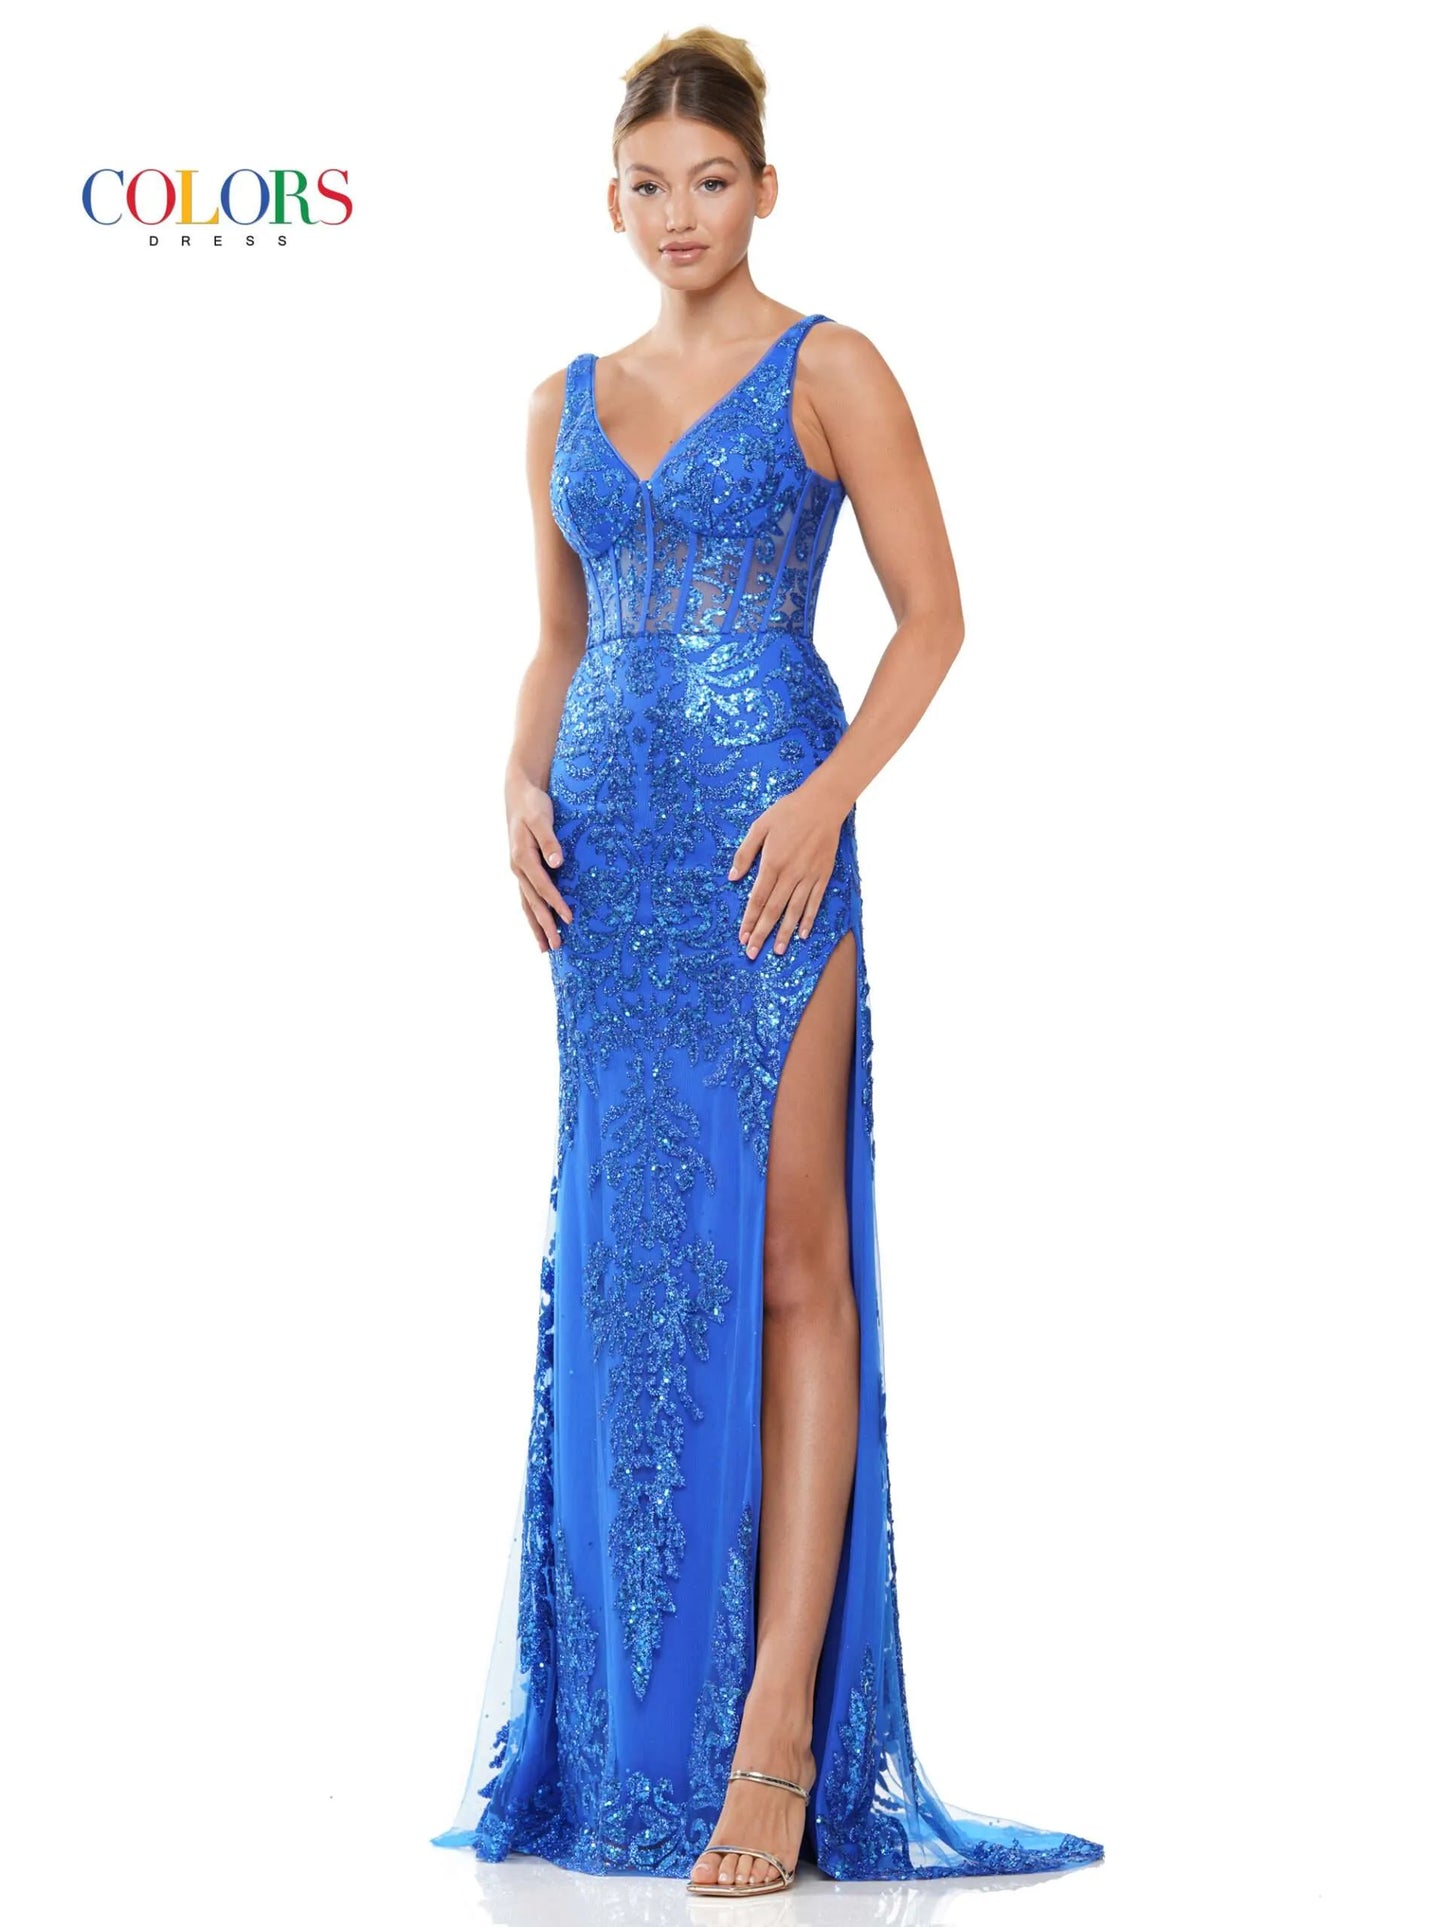 Elevate your formal look in the Colors Dress 2990. The corset top and V-neckline enhance your figure, while the high slit adds a touch of elegance. Crafted with glittered sequin mesh, this gown will make you shine at any pageant or prom, ensuring you stand out from the crowd.